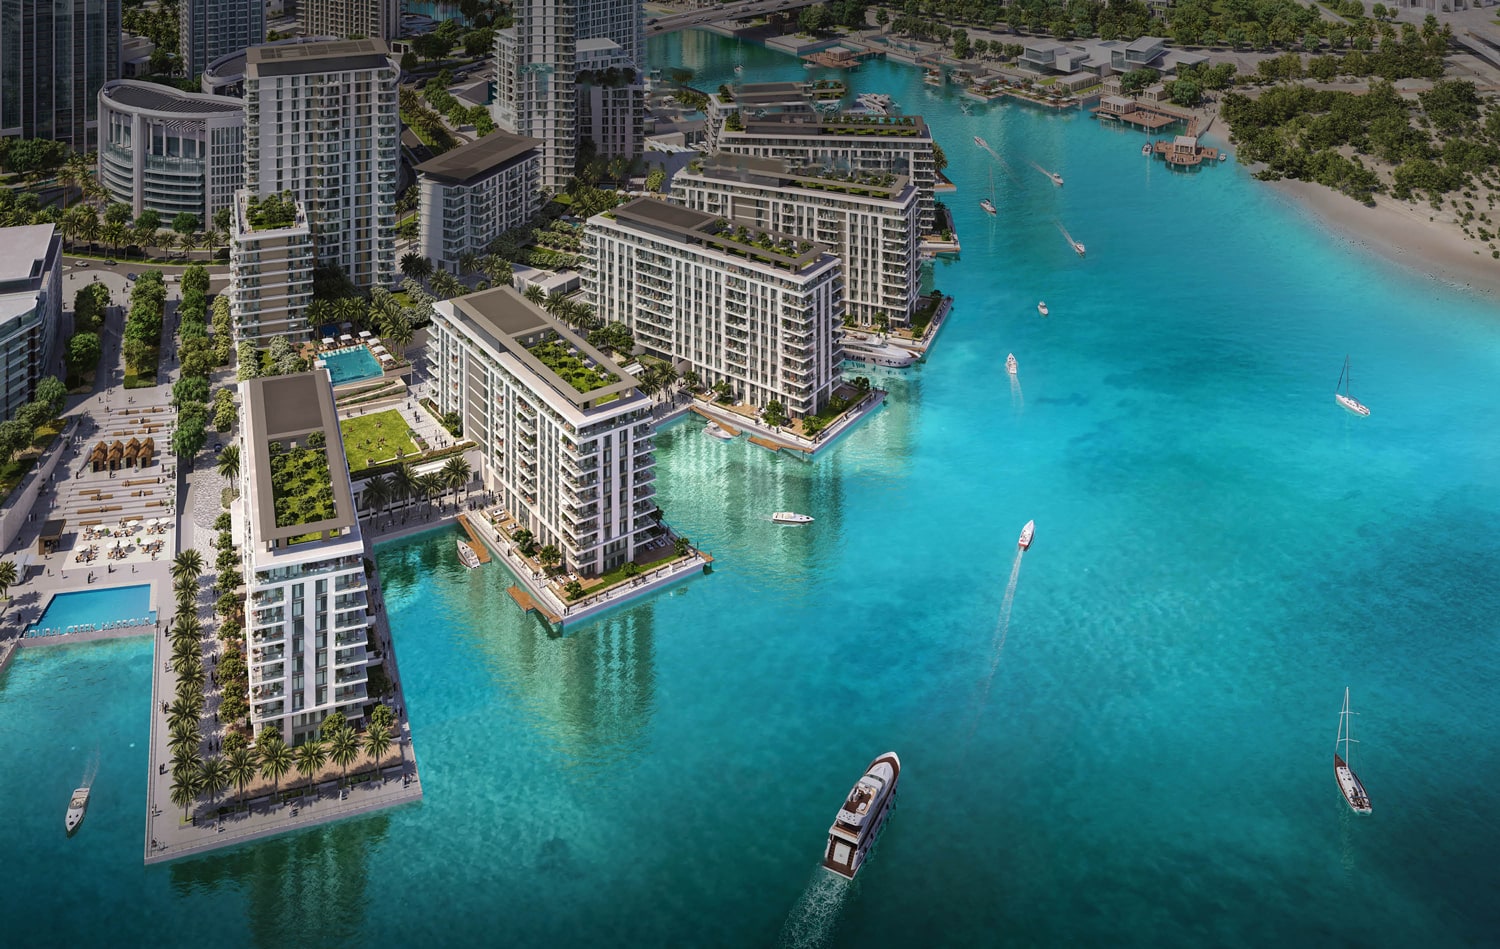 The Cove Apartments by Emaar